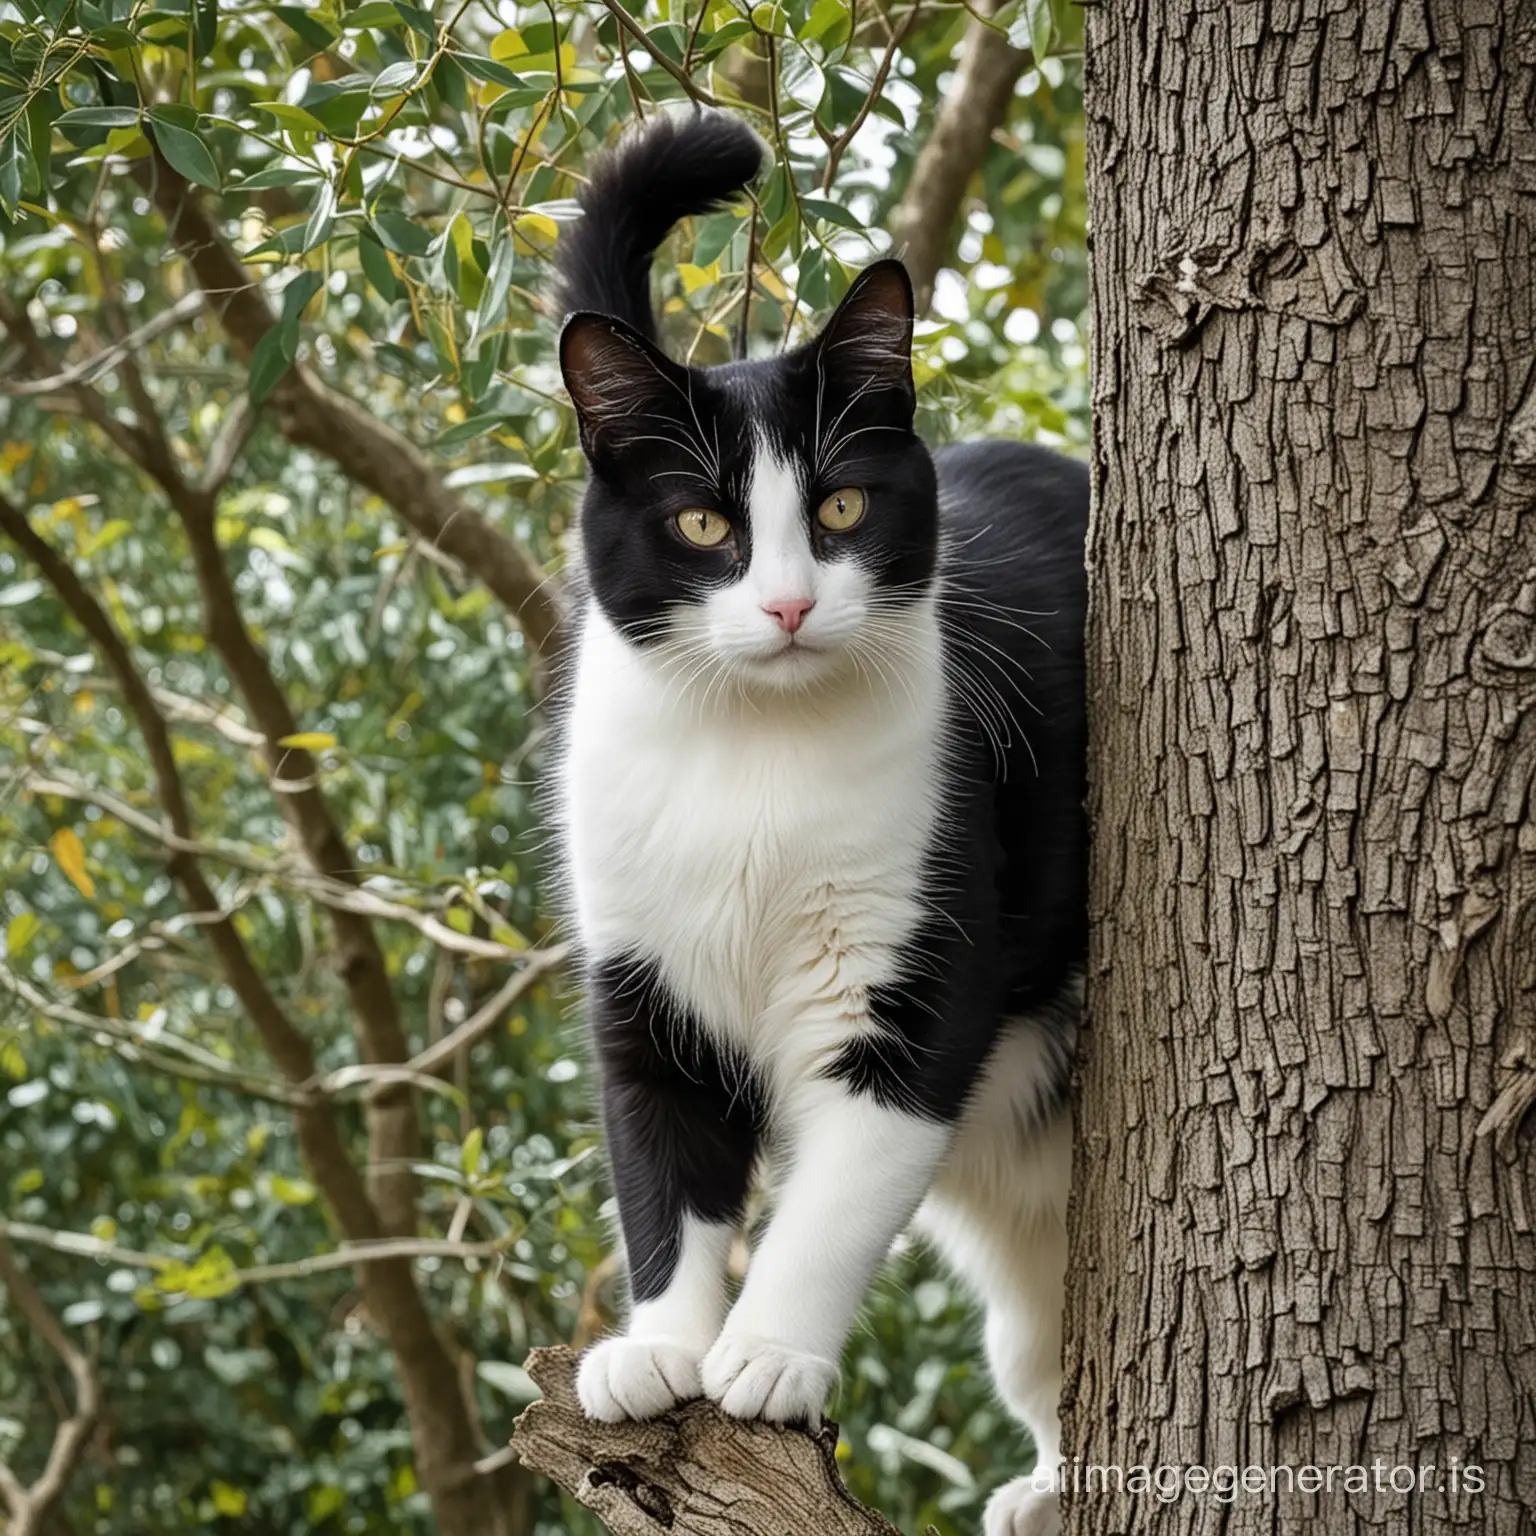 Black and white cat climbing up a tree